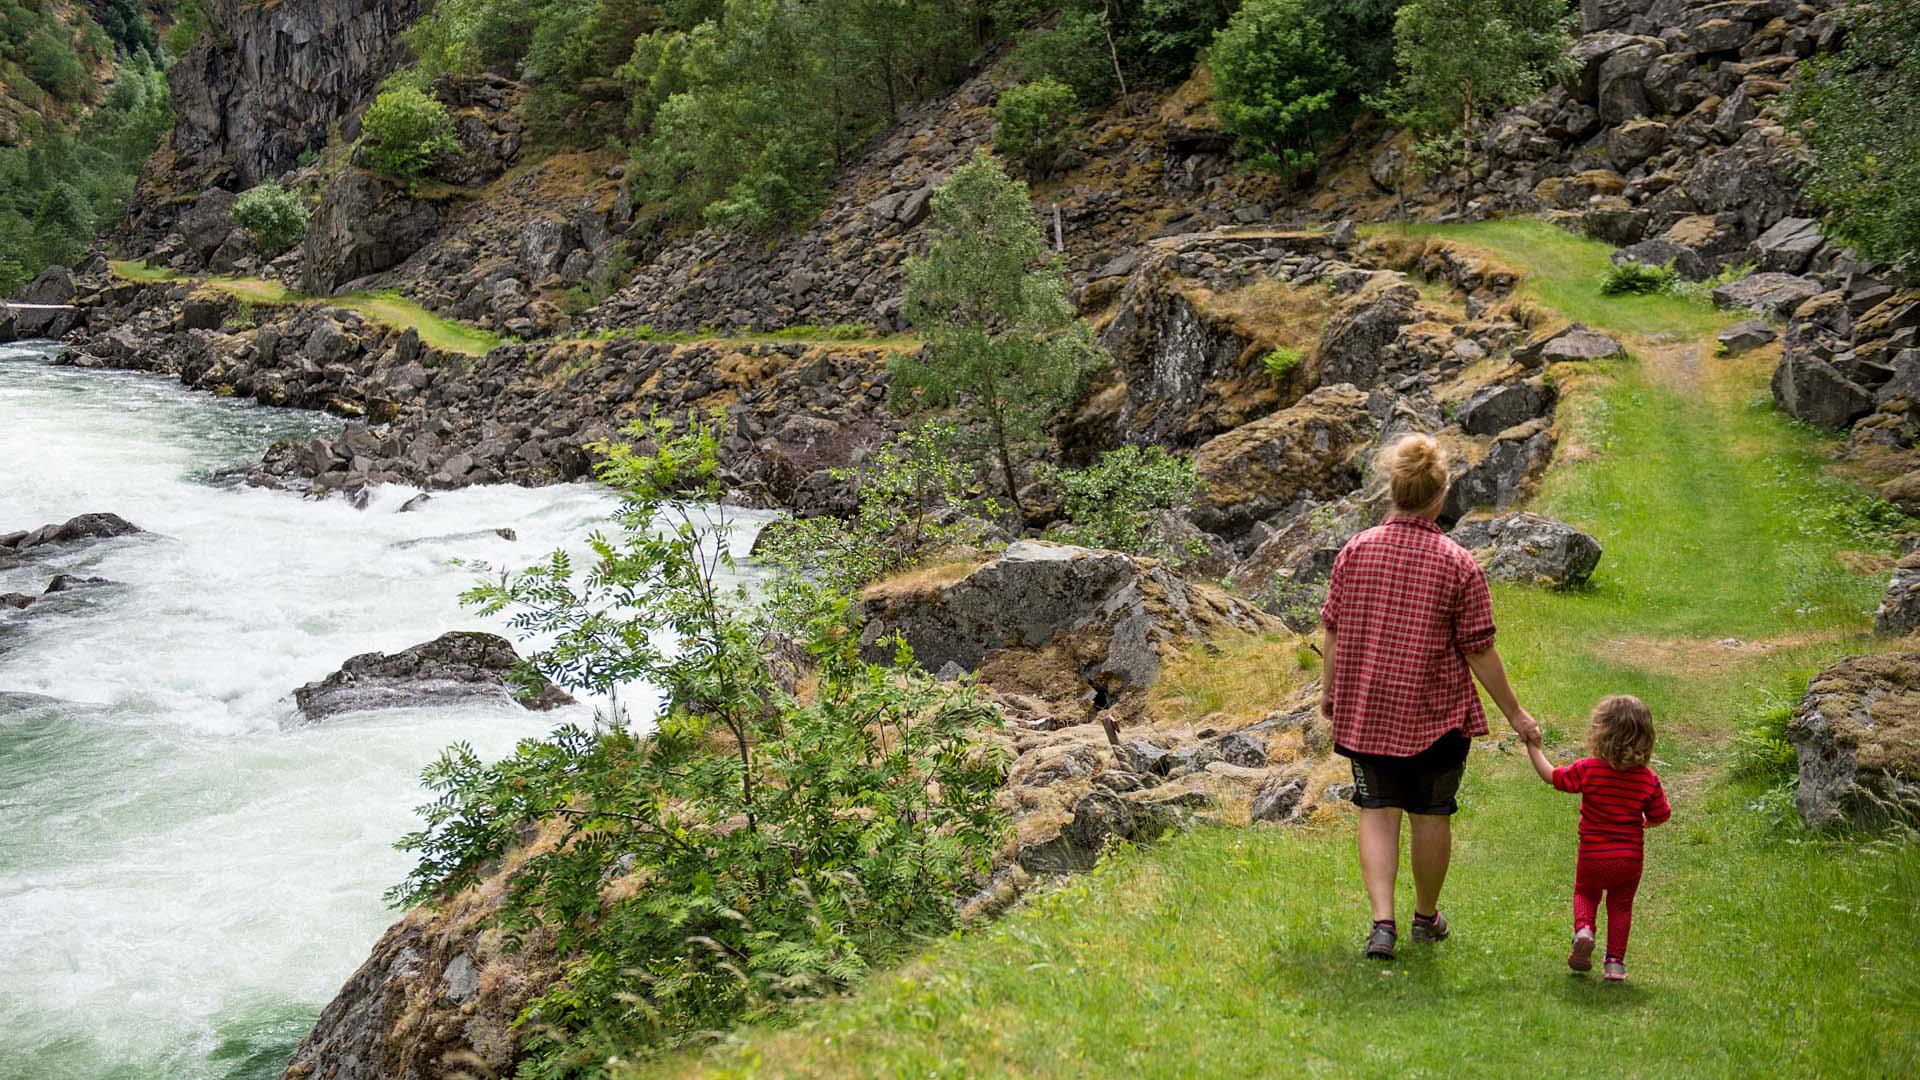 A mother and a small child walk on a historical road with grass cover along a river in a gorge.